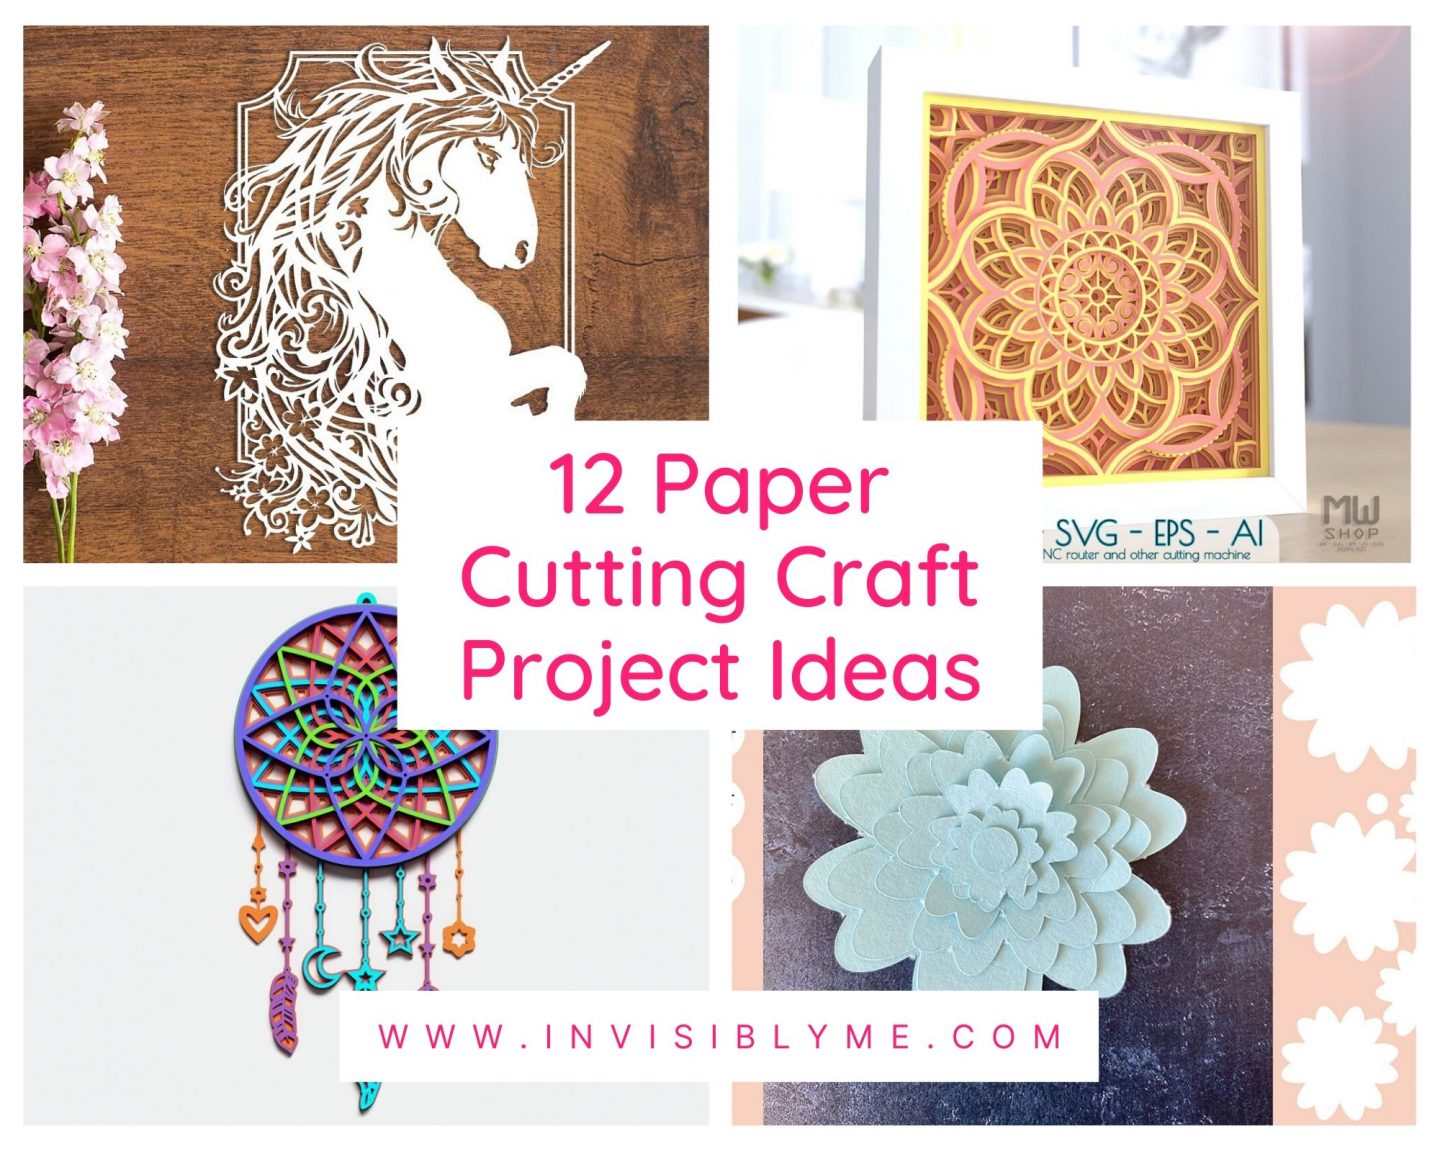 A collage of four images from the DesignBundles range, including cut out art with a unicorn, mandala, flower and dreamcatcher. The post title is in the middle: 12 paper cutting craft project ideas.